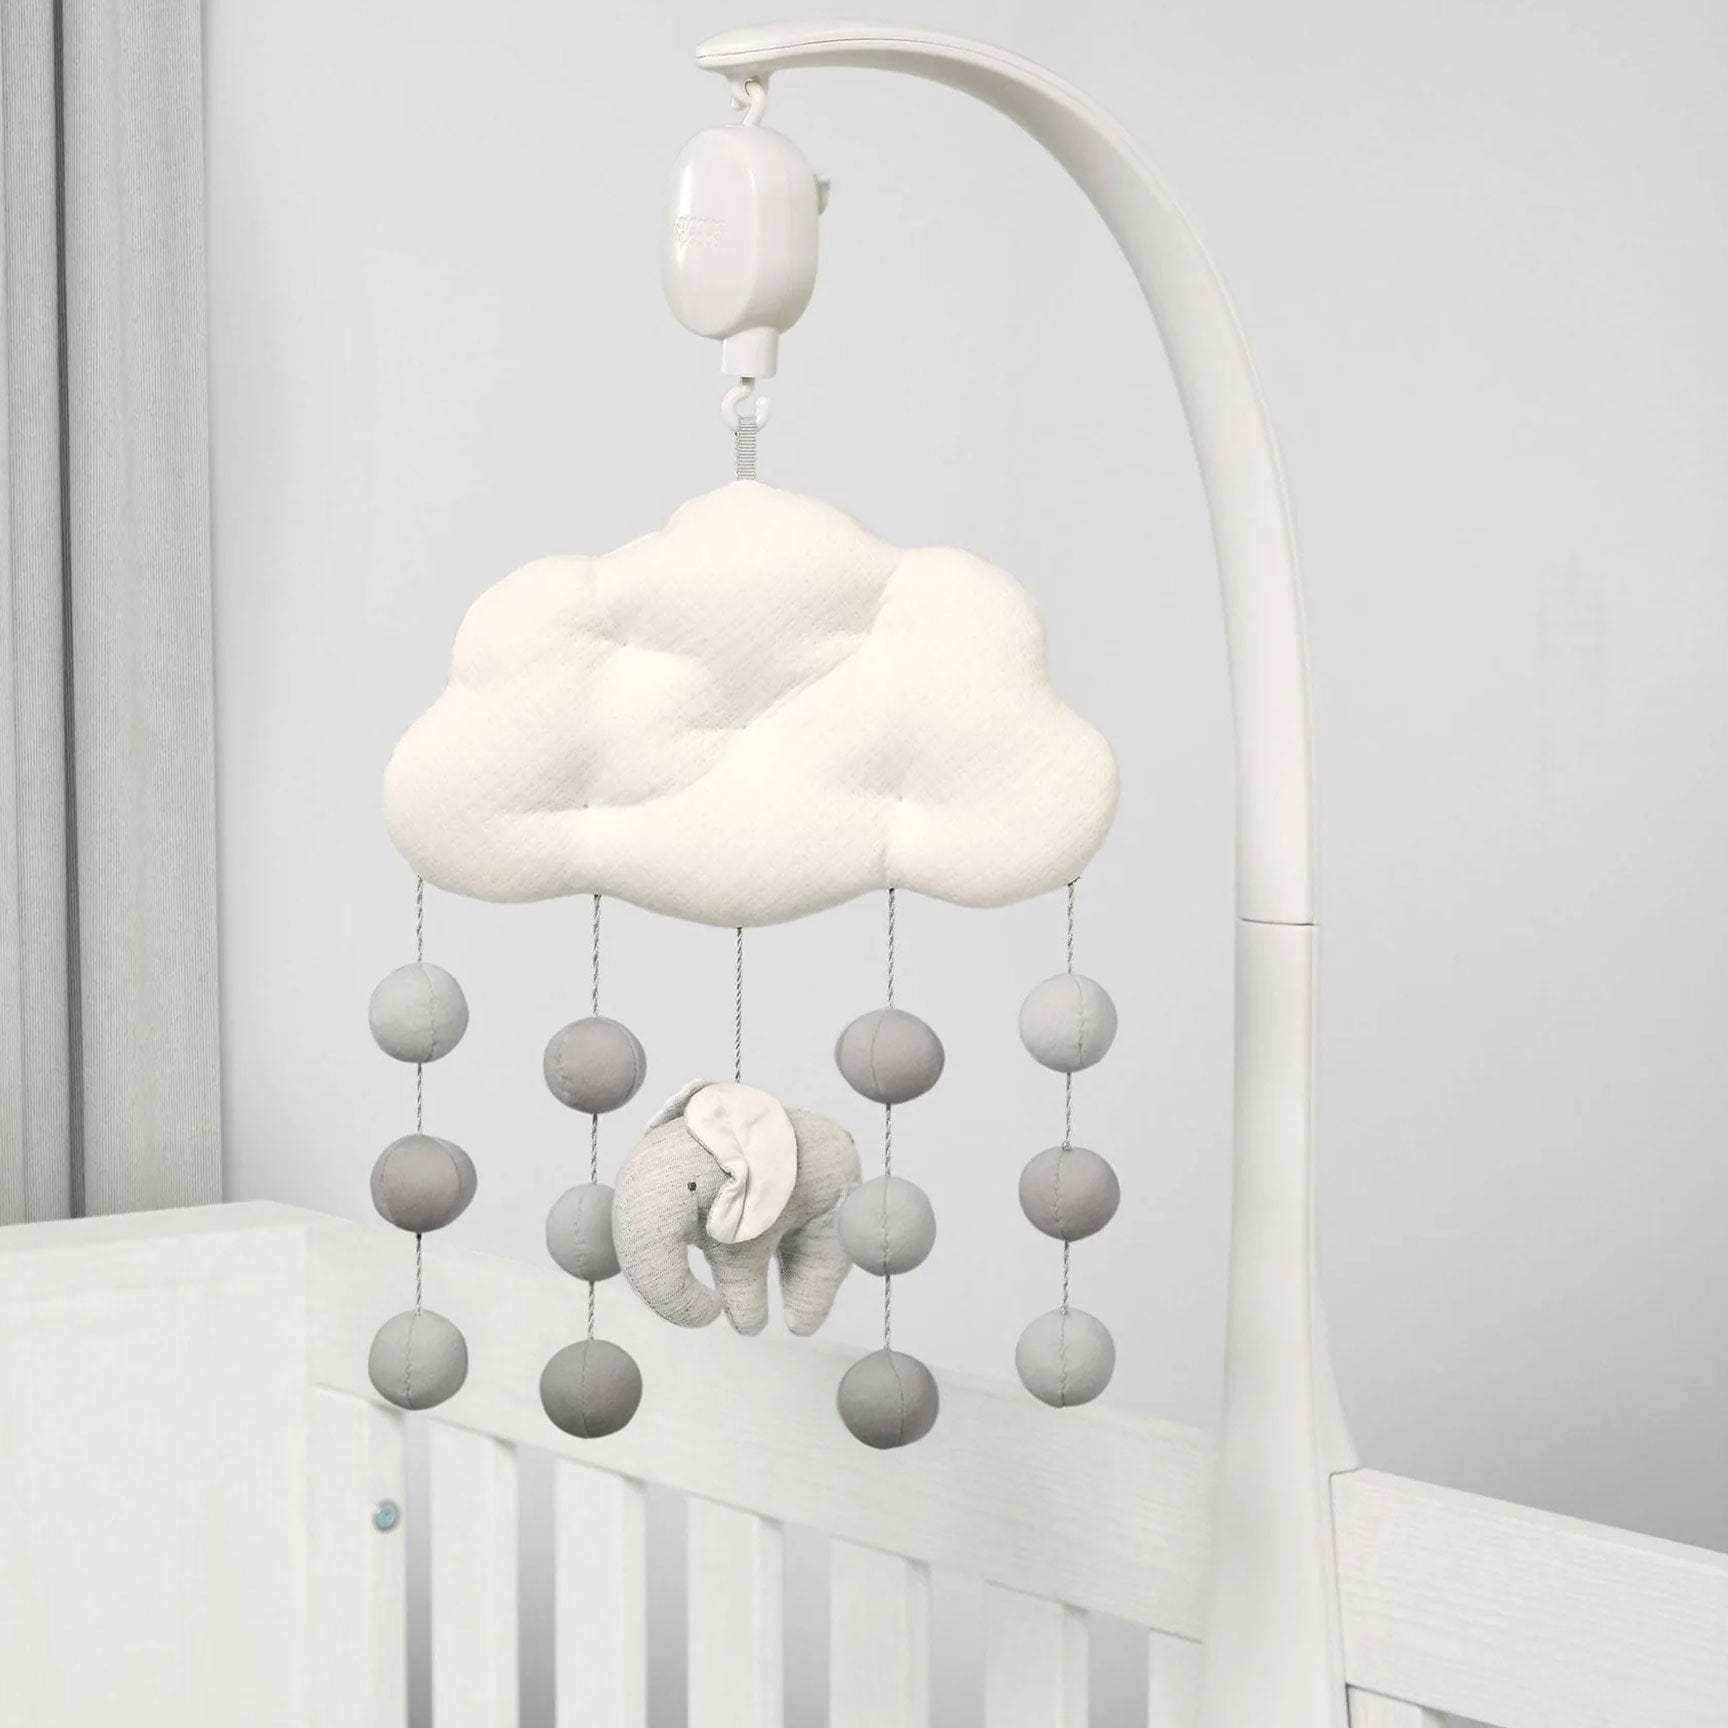 Mamas & Papas Welcome to the World Cot Musical Mobile in Elephant Musical Mobiles 7560WW201 5057232422877